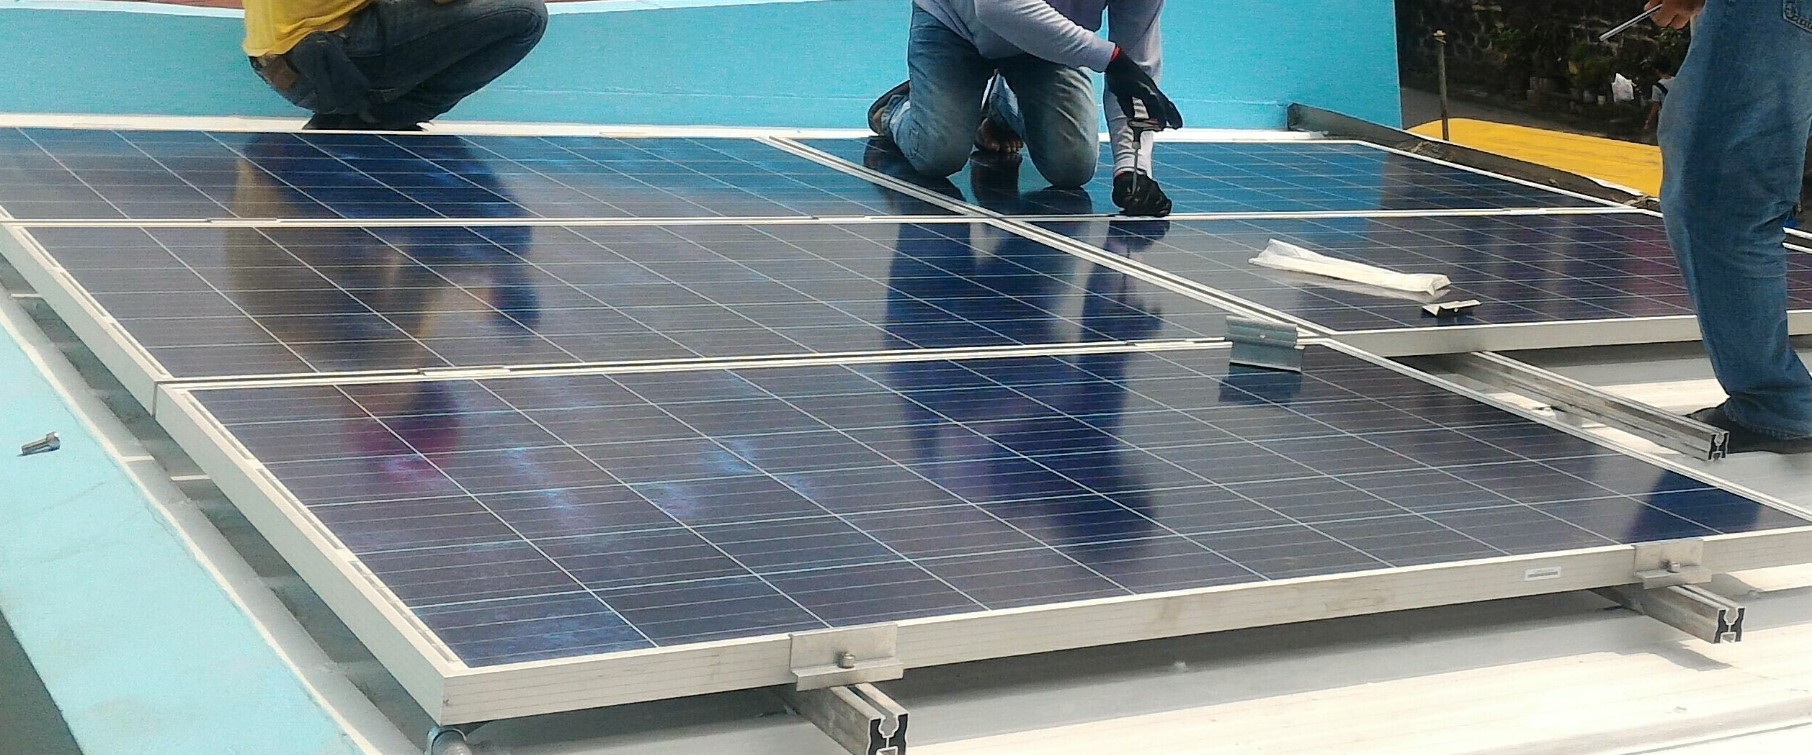 How to Reduce Solar Panel Installation Costs